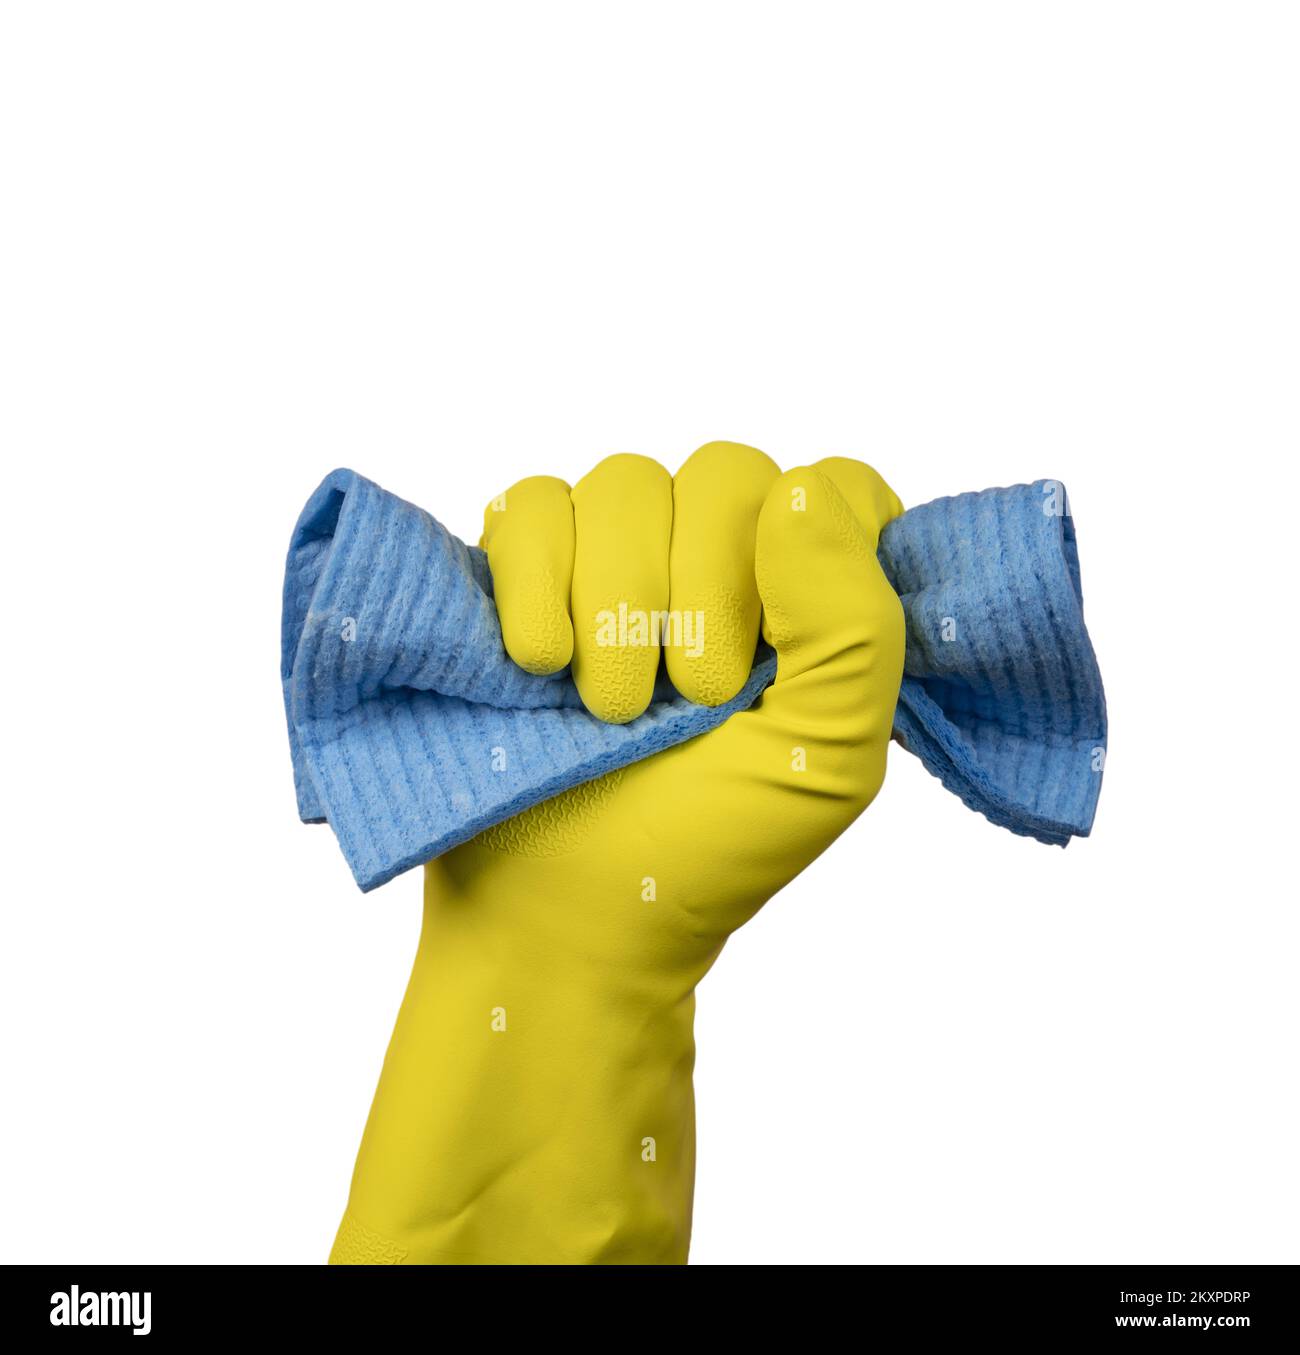 a hand with a yellow rubber glove holds a cleaning sponge Stock Photo